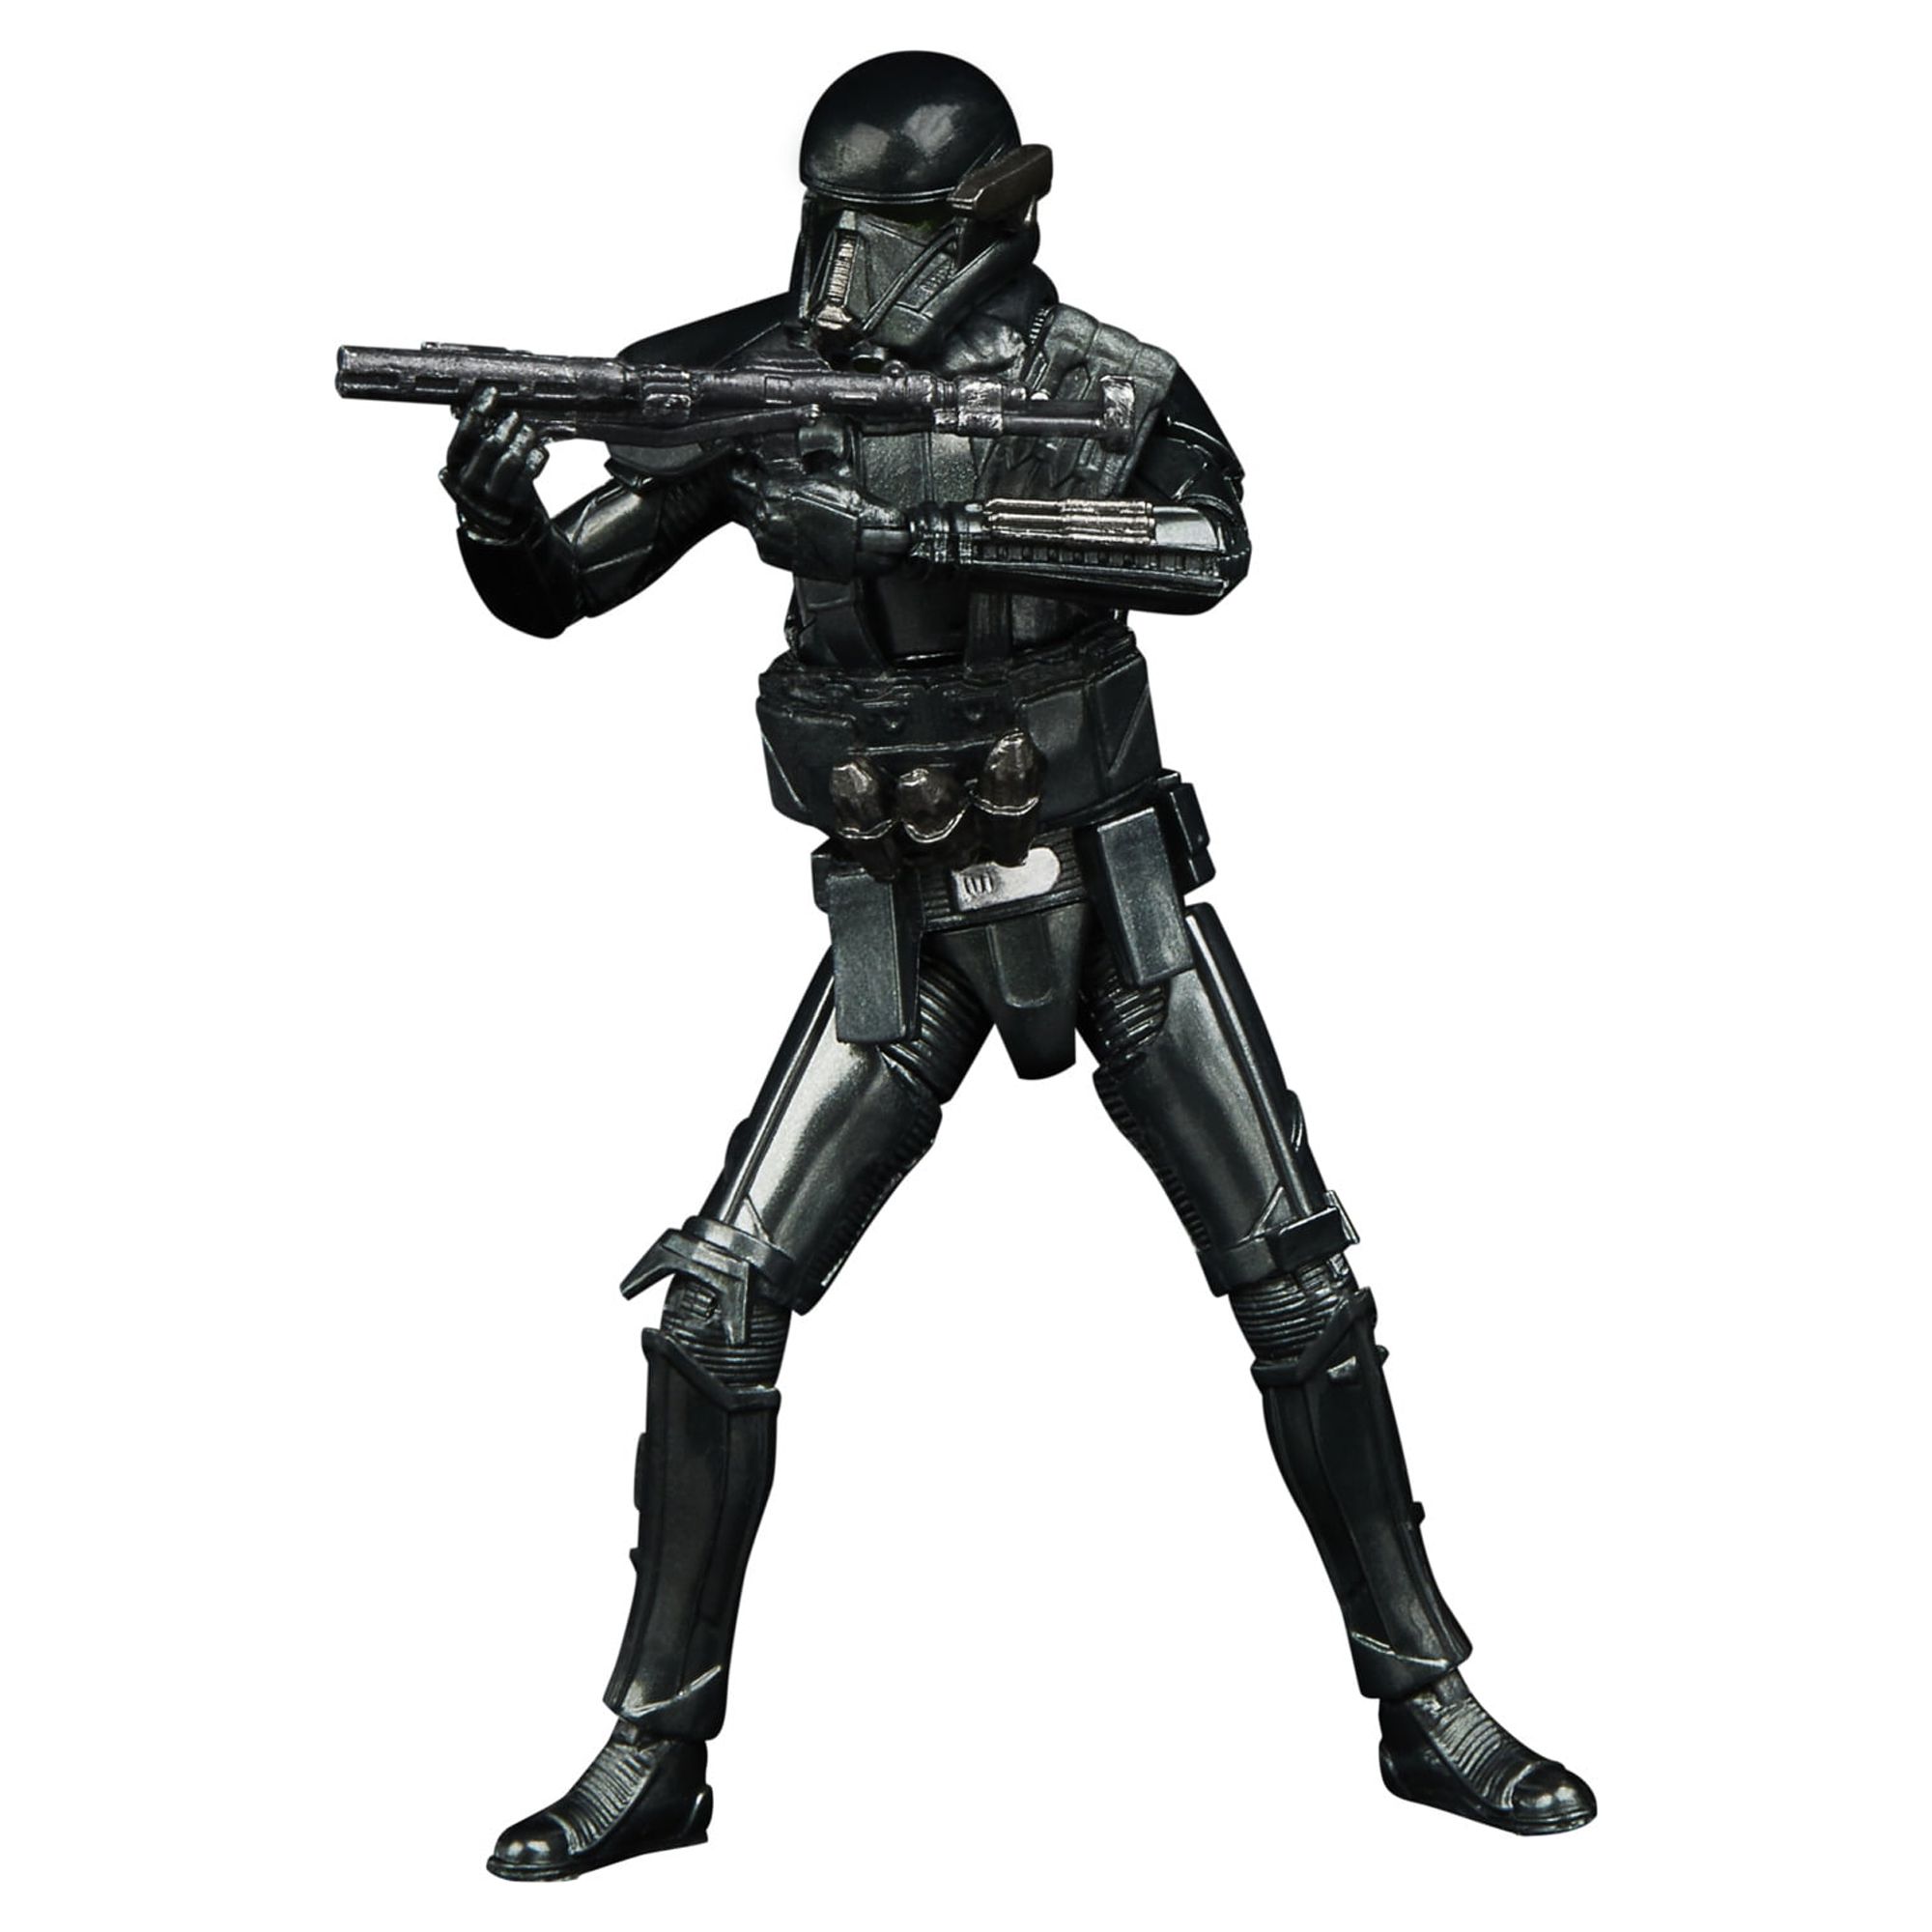 Star Wars: The Mandalorian The Vintage Collection Imperial Death Trooper Kids Toy Action Figure for Boys and Girls Ages 4 5 6 7 8 and Up (3.75”) - image 1 of 8